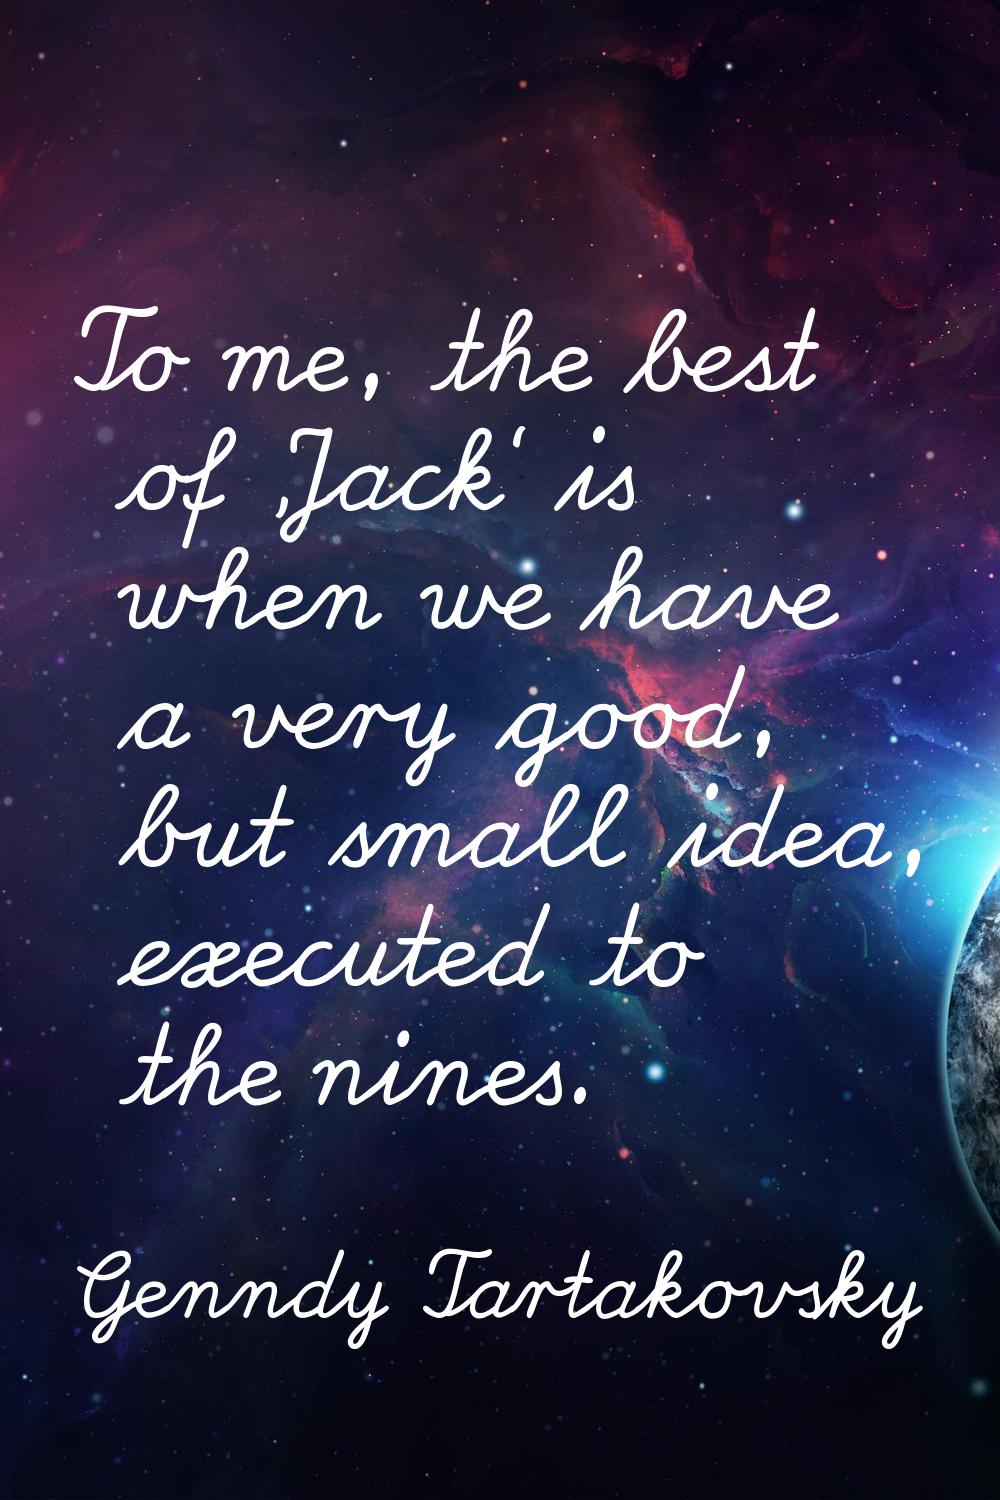 To me, the best of 'Jack' is when we have a very good, but small idea, executed to the nines.